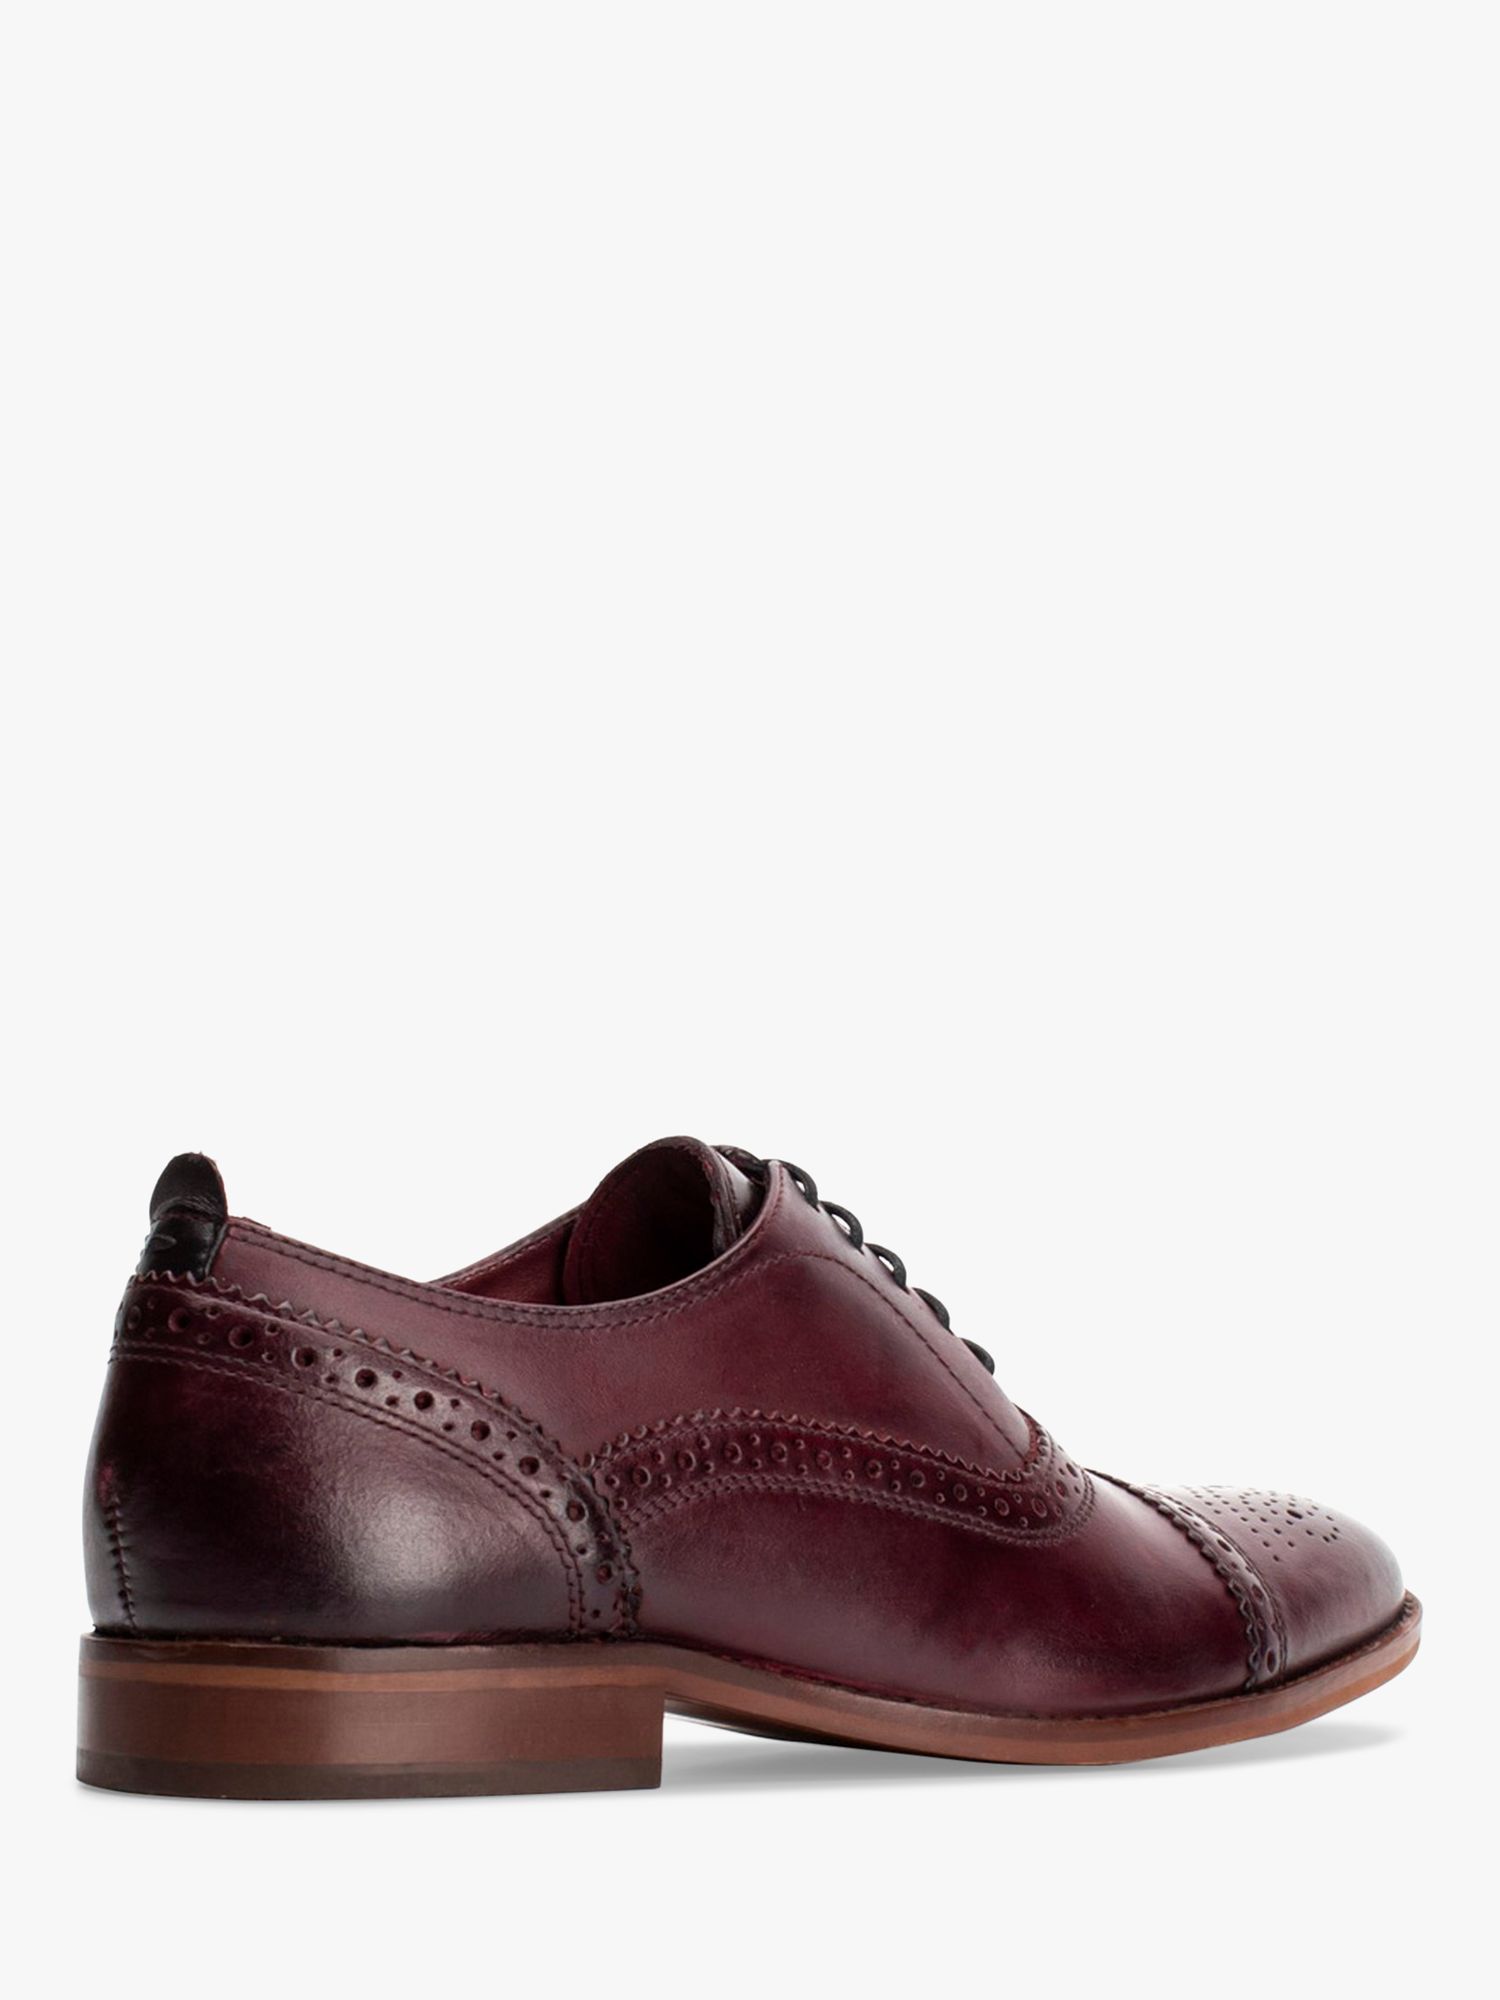 Buy Base London Cast Washed Leather Oxford Shoes, Dark Red Online at johnlewis.com